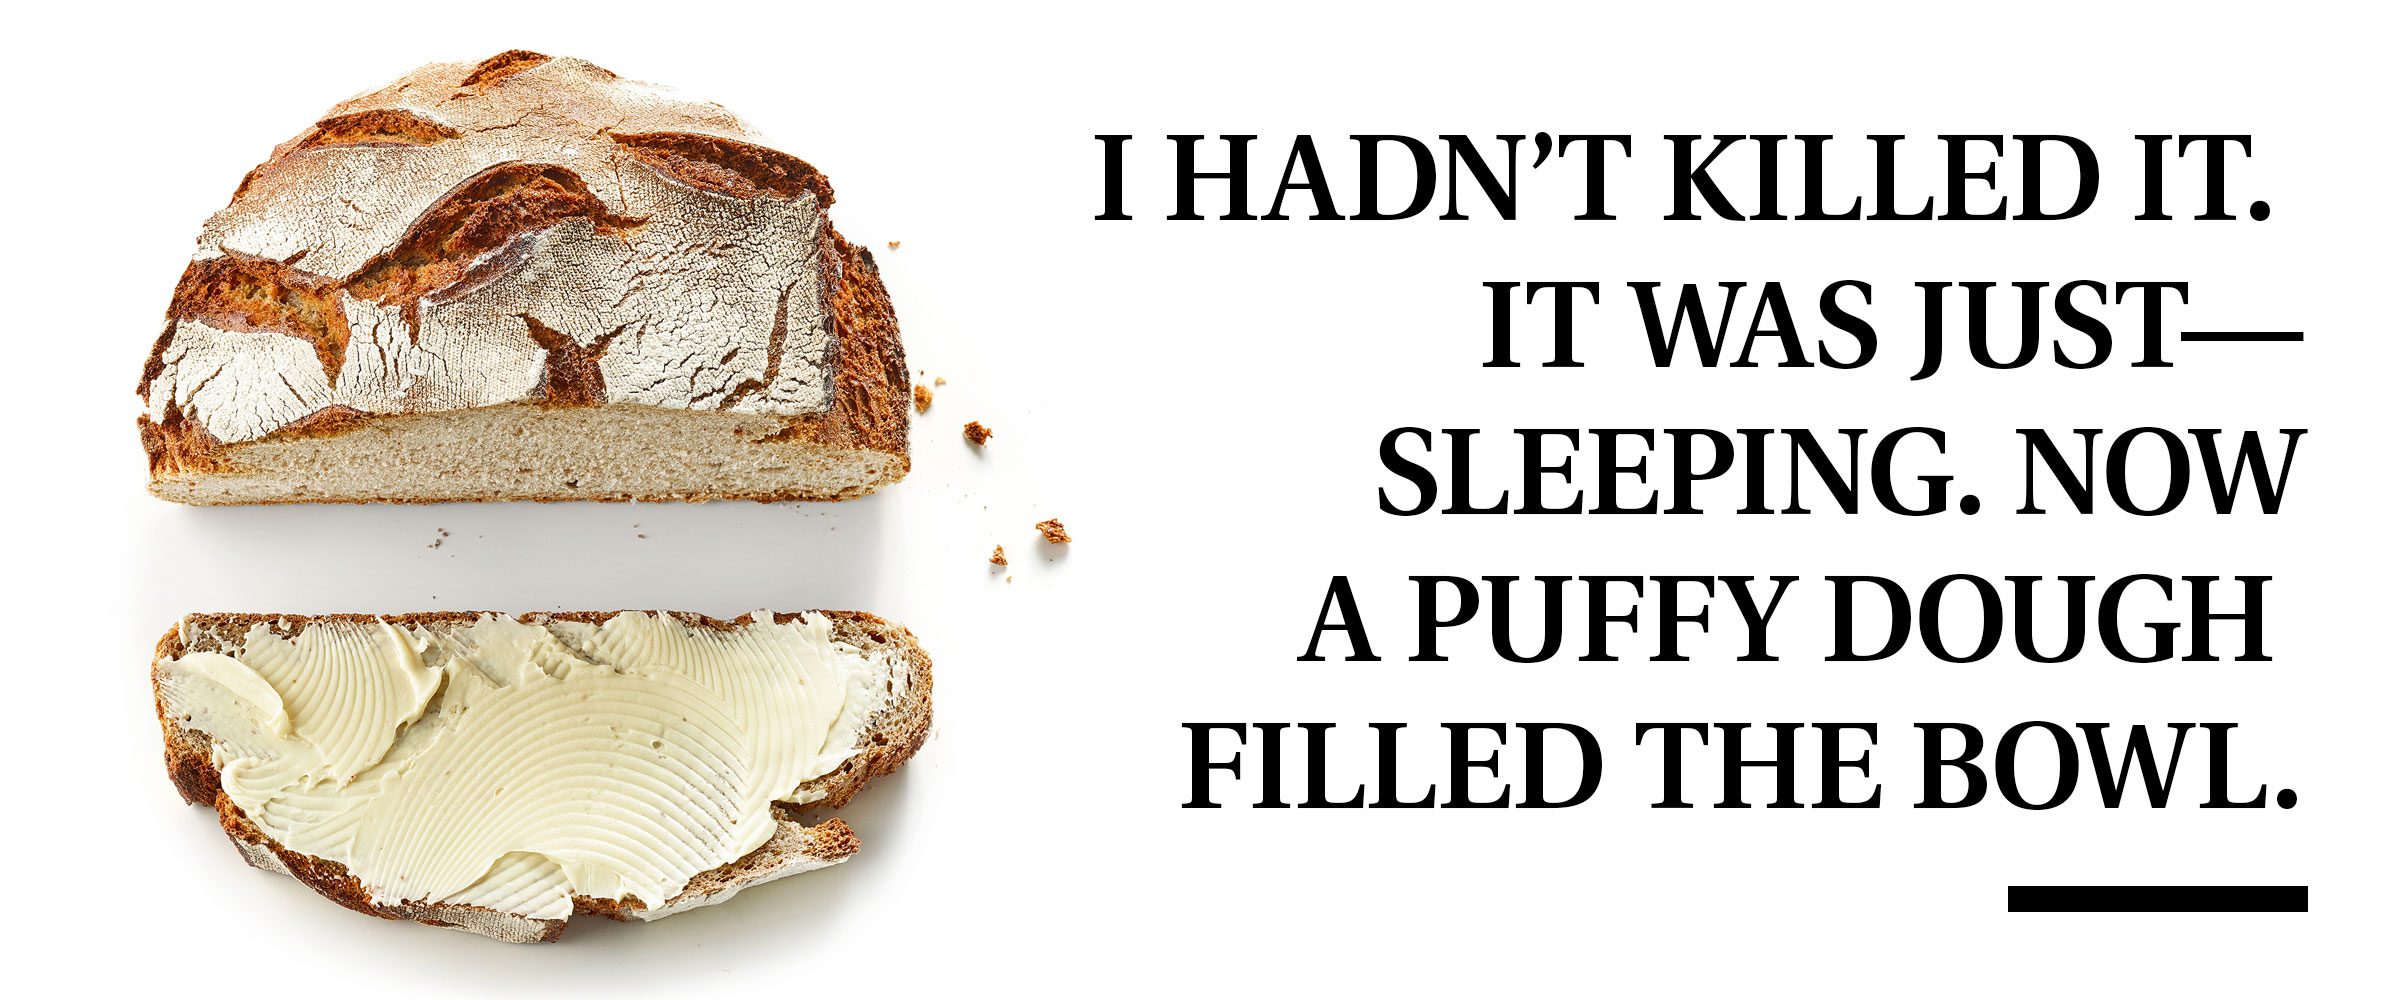 bread with pull quote text: "I hadn't killed it. It was just-sleeping. Now a puffy dough filled the bowl."